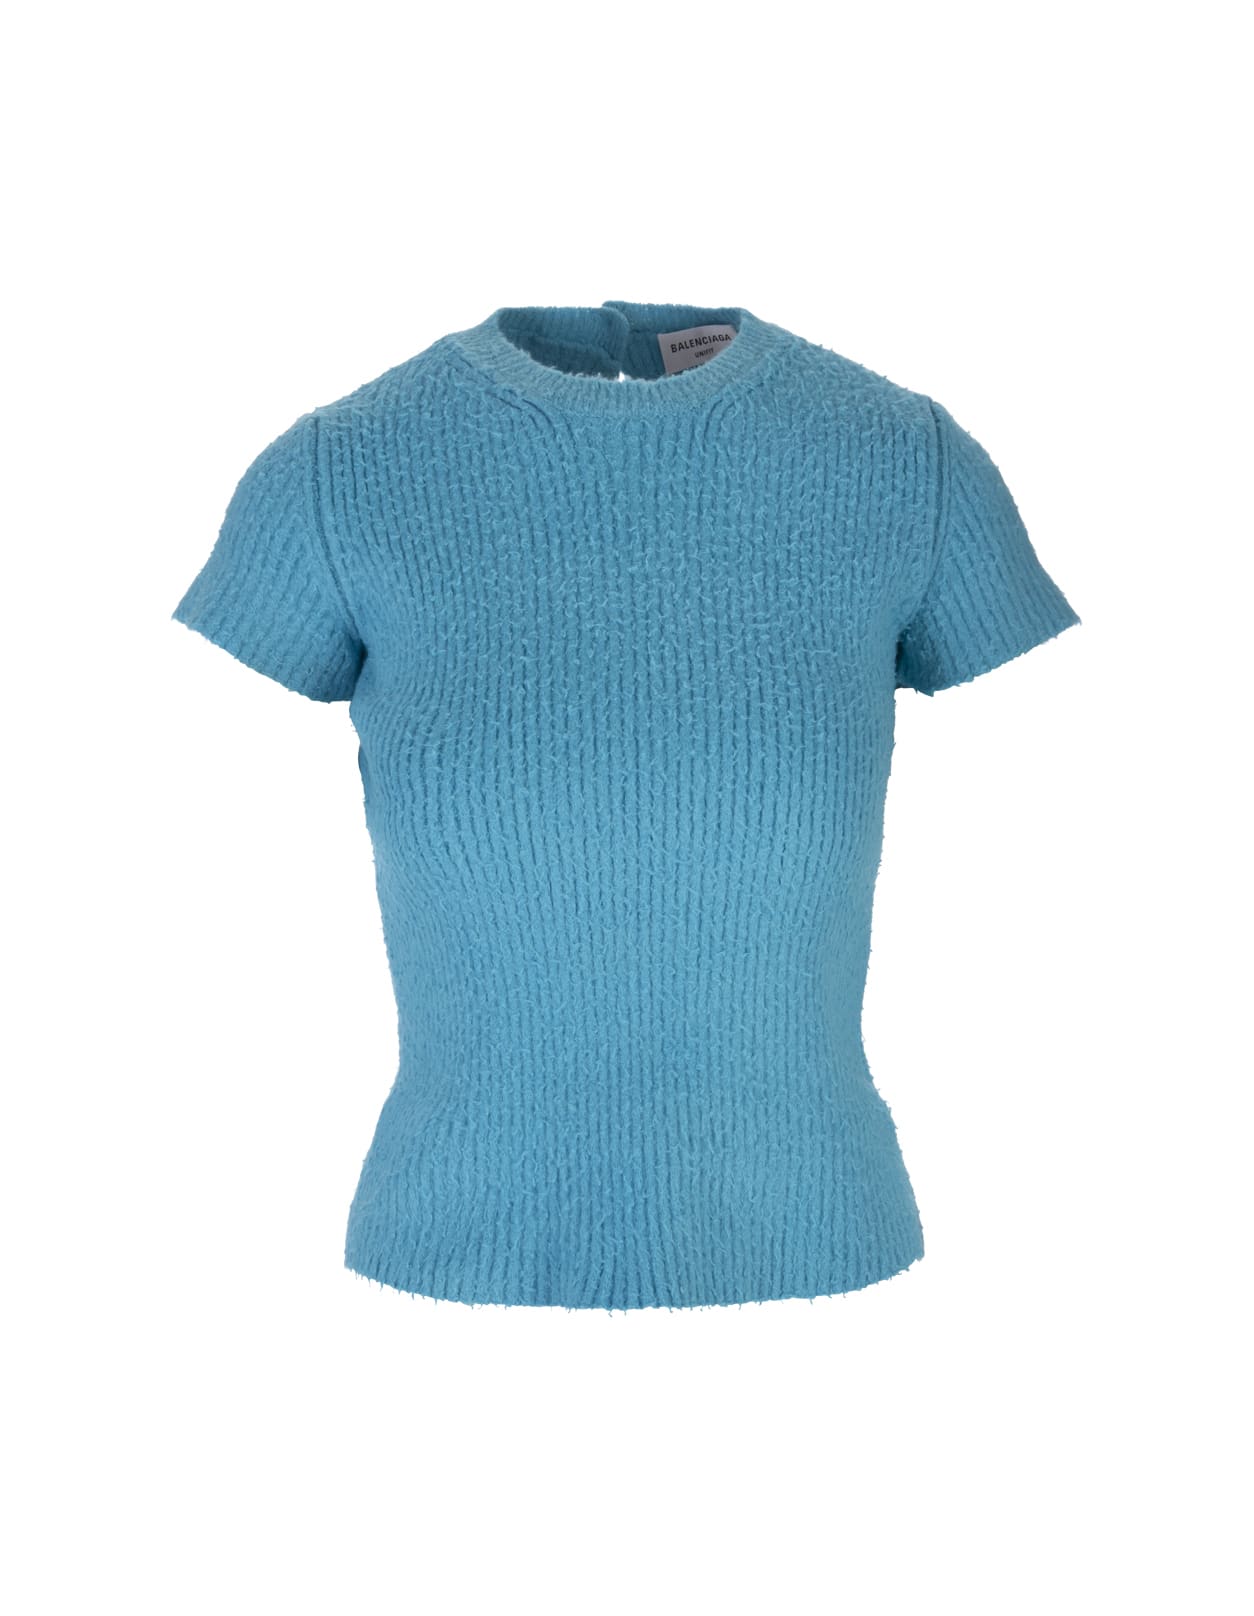 Balenciaga Woman Top In Turquoise Cotton Pilling Jersey